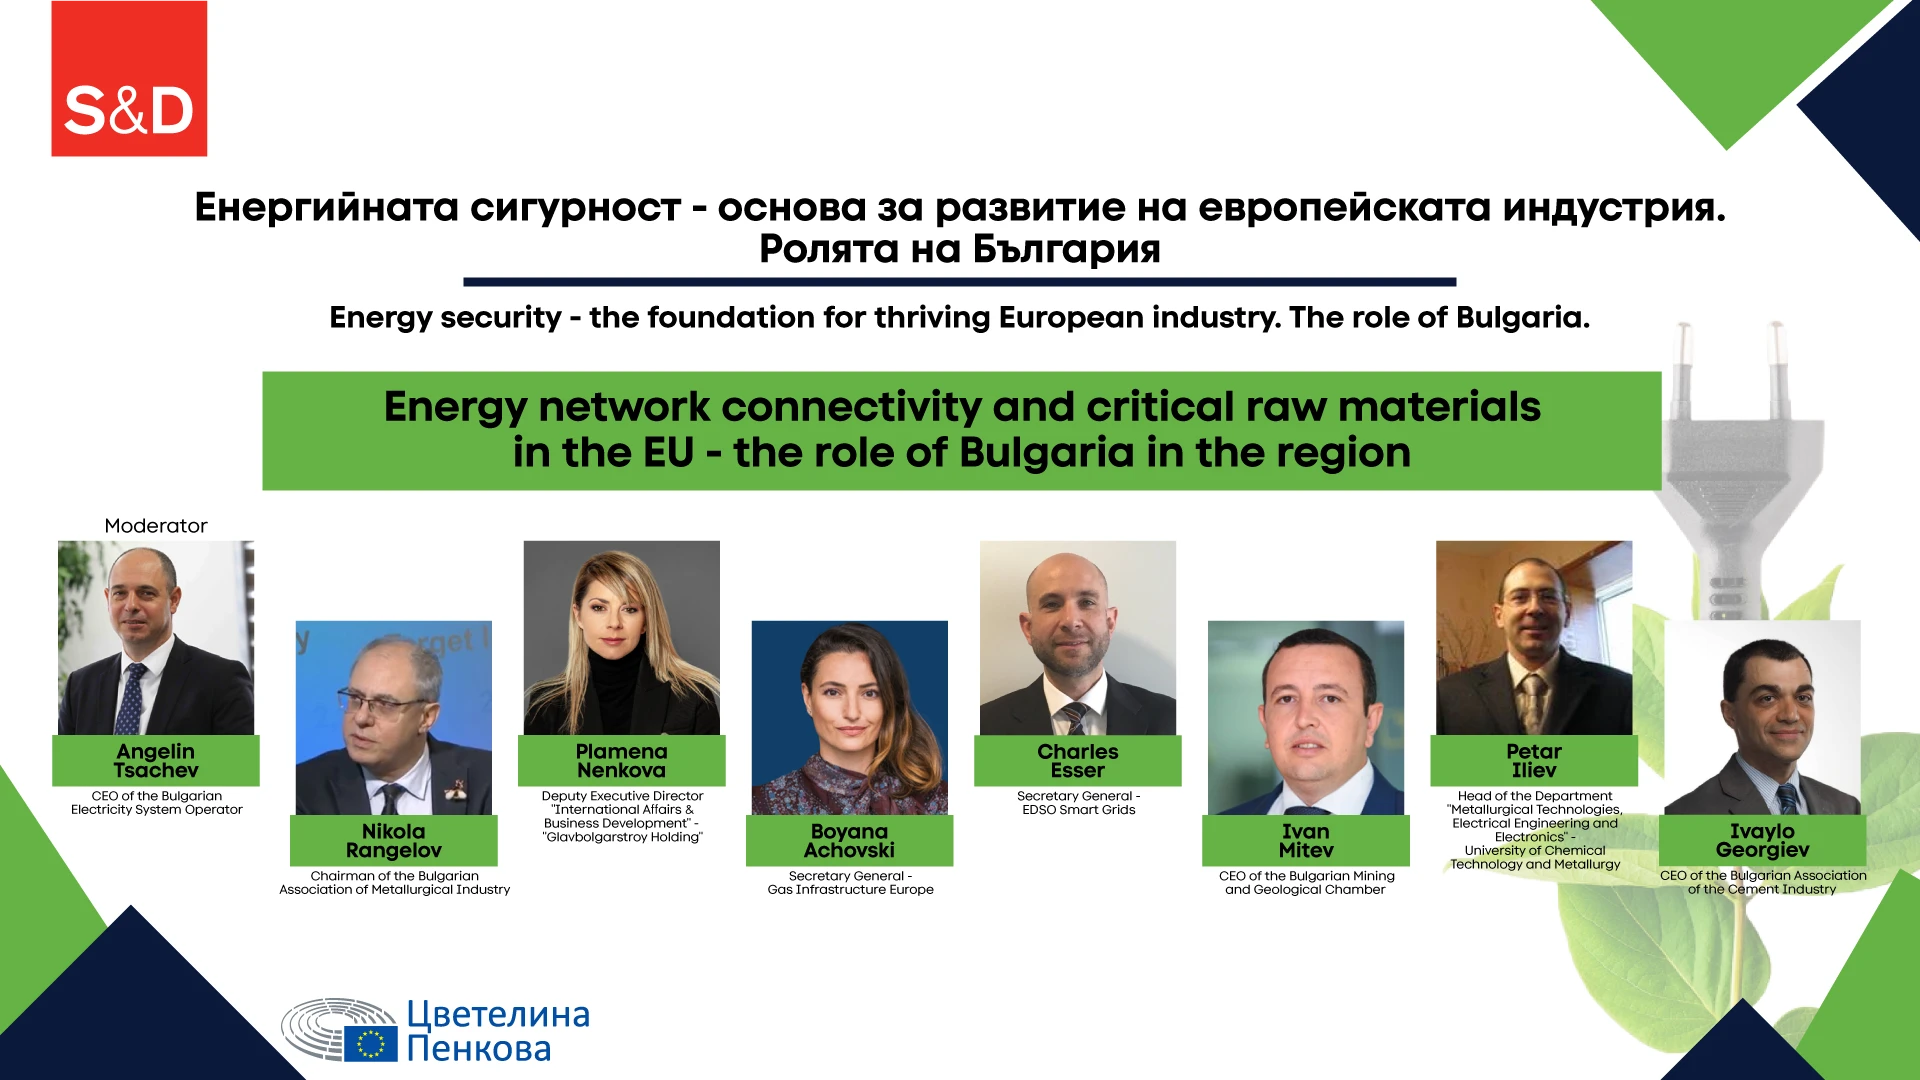 2009-energy-network-connectivity-and-critical-raw-materials-in-the-eu---the-role-of-b-17109656467279.png